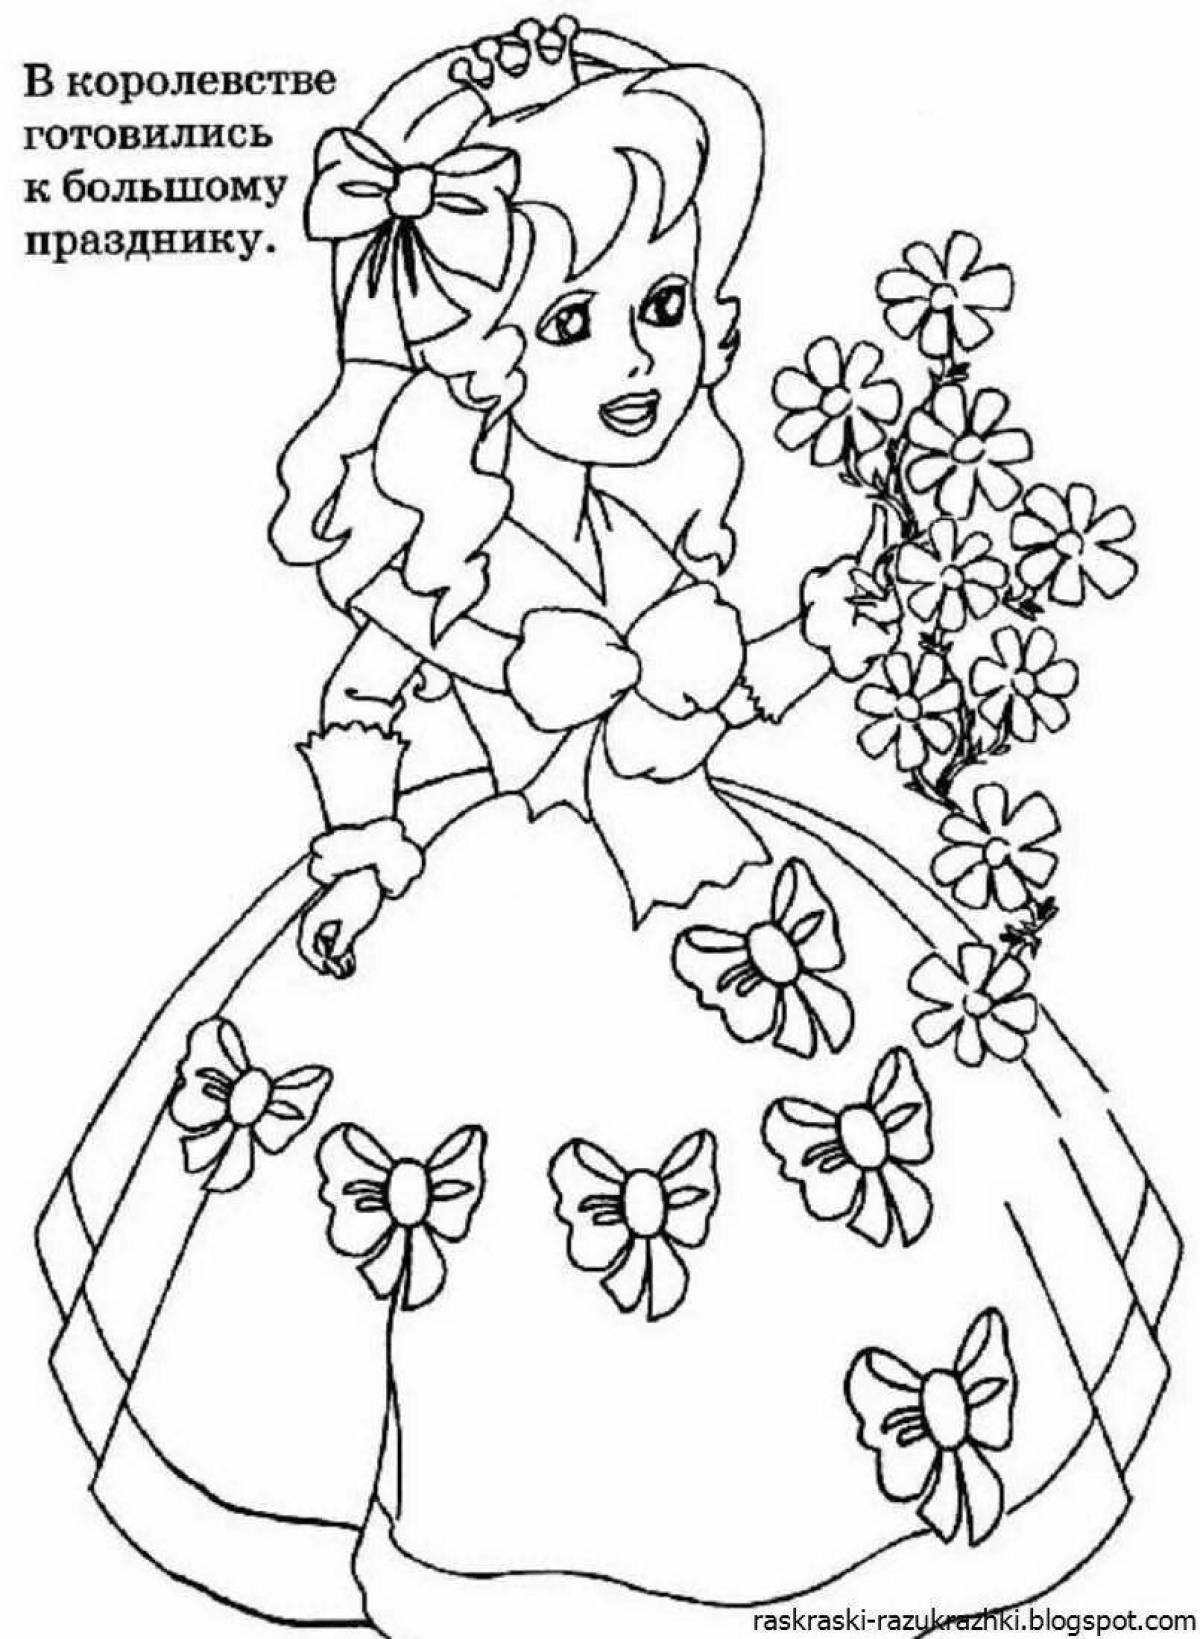 Colorful coloring book for girls 5-7 years old